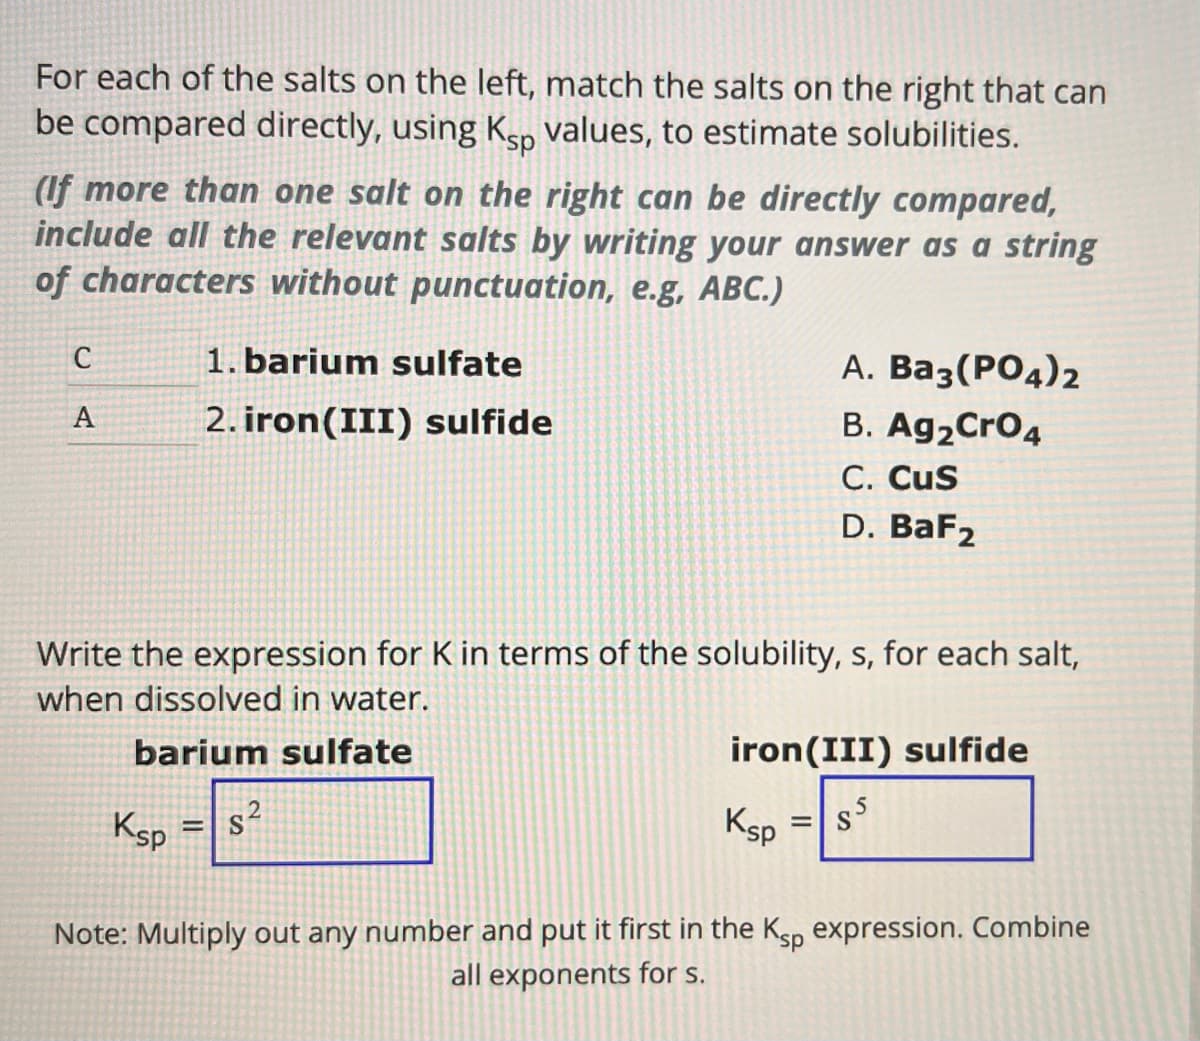 For each of the salts on the left, match the salts on the right that can
be compared directly, using Ksp values, to estimate solubilities.
(If more than one salt on the right can be directly compared,
include all the relevant salts by writing your answer as a string
of characters without punctuation, e.g, ABC.)
C
1. barium sulfate
A
2. iron(III) sulfide
A. Ba3(PO4)2
B. Ag2CrO4
C. CUS
D. BaF2
Write the expression for K in terms of the solubility, s, for each salt,
when dissolved in water.
barium sulfate
Ksp
=
iron(III) sulfide
Ksp
=
$5
S
Note: Multiply out any number and put it first in the Ksp expression. Combine
all exponents for s.